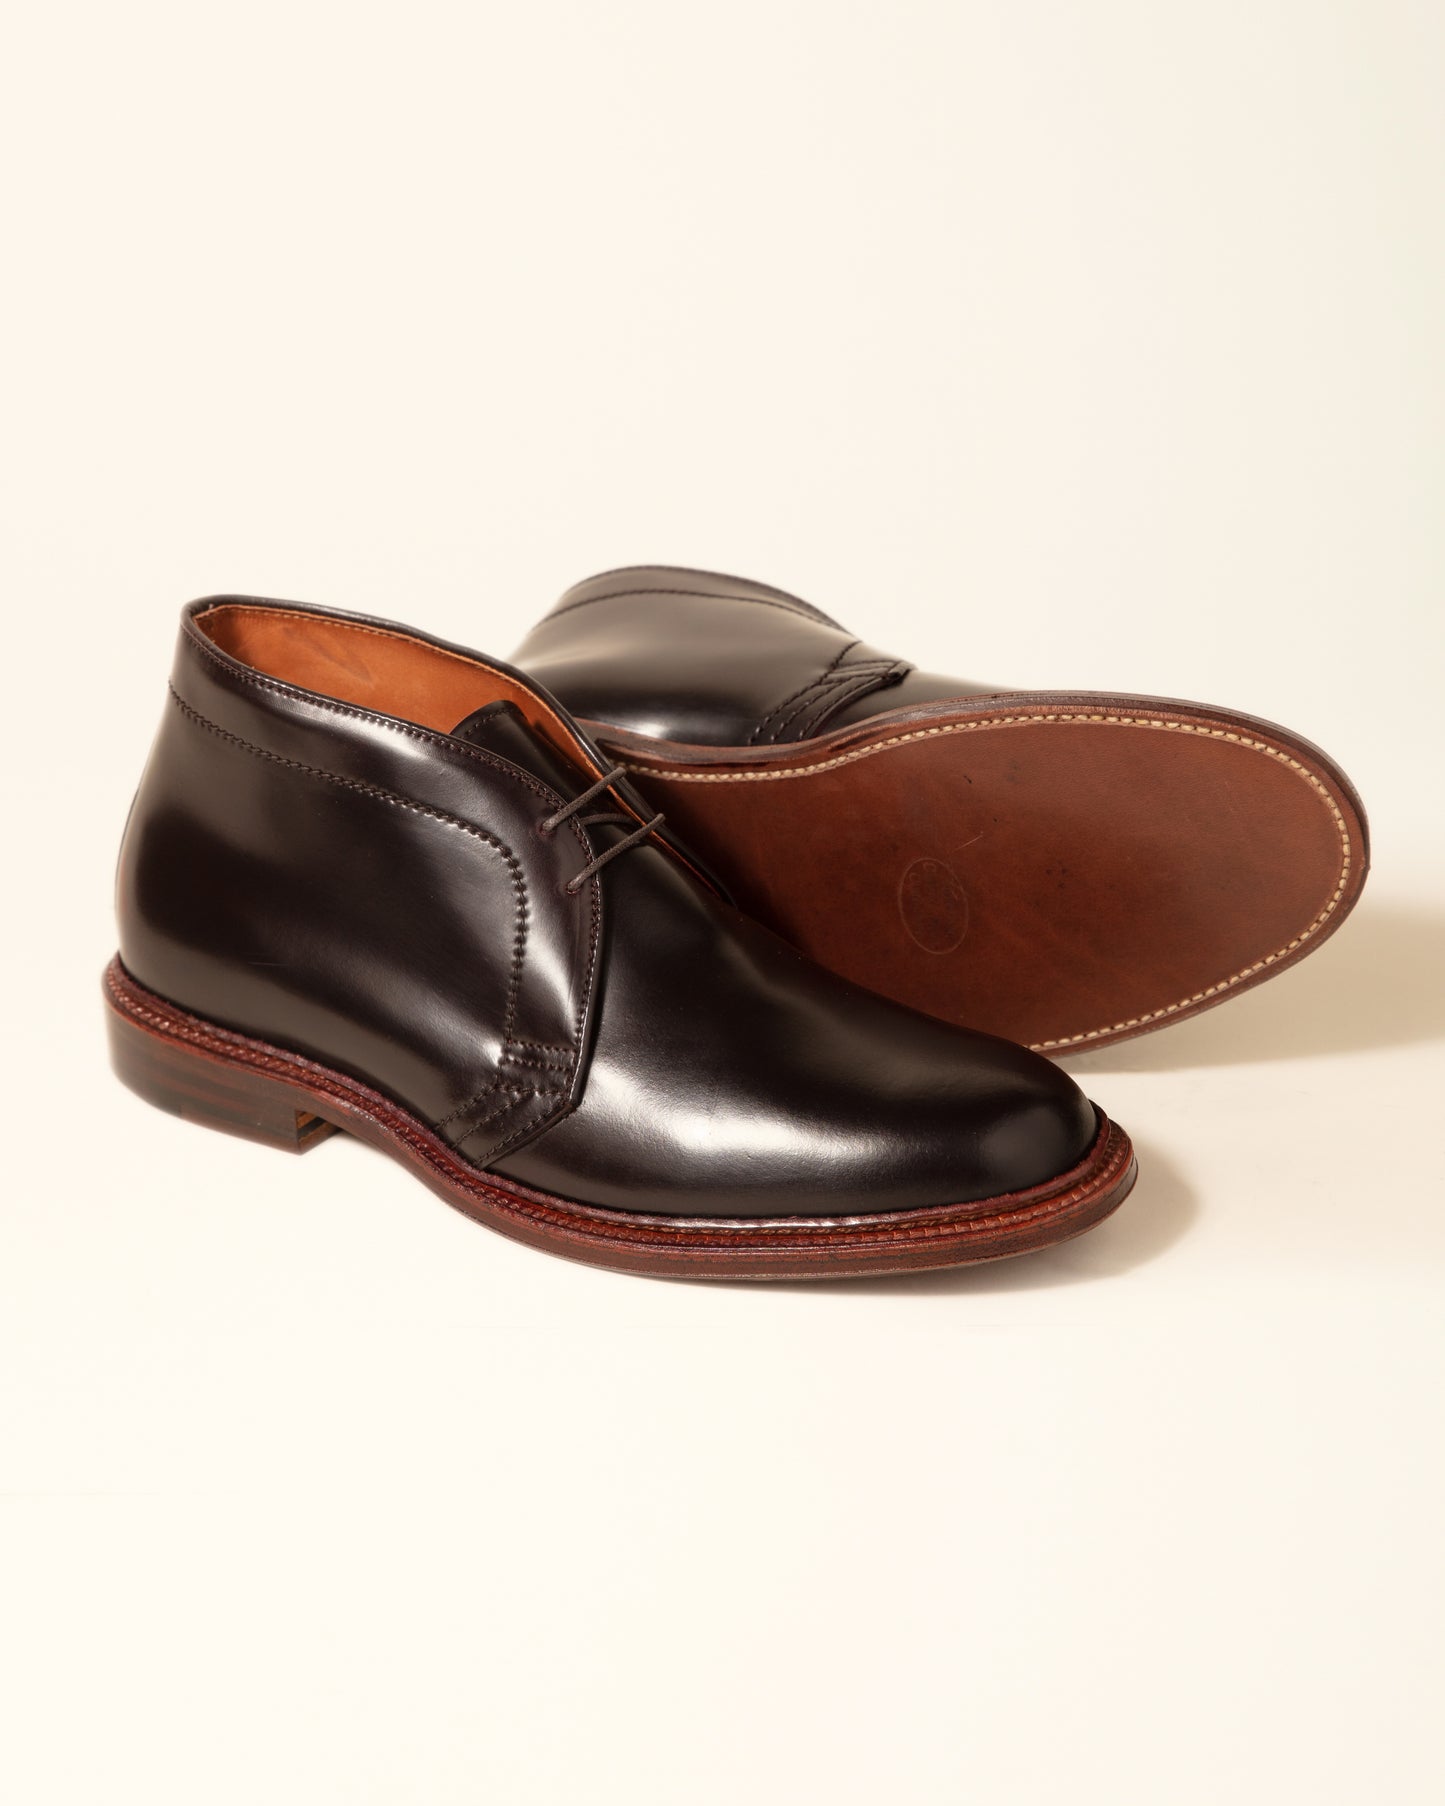 1339A Chukka Boot in Color 8 Shell Cordovan, Barrie Last